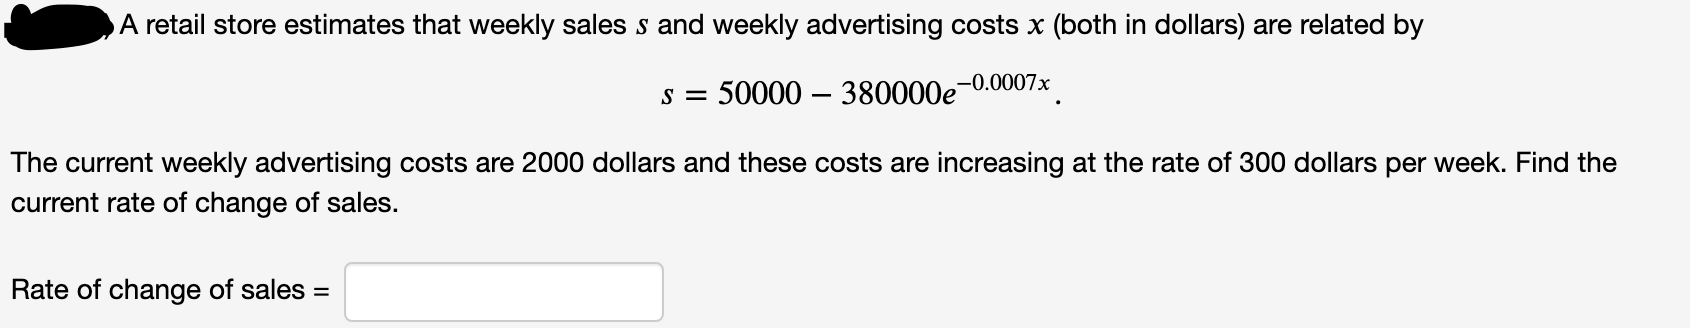 A retail store estimates that weekly sales s and weekly advertising costs x (both in dollars) are related by
-0.0007x
s = 50000 – 380000e
The current weekly advertising costs are 2000 dollars and these costs are increasing at the rate of 300 dollars per week. Find the
current rate of change of sales.
